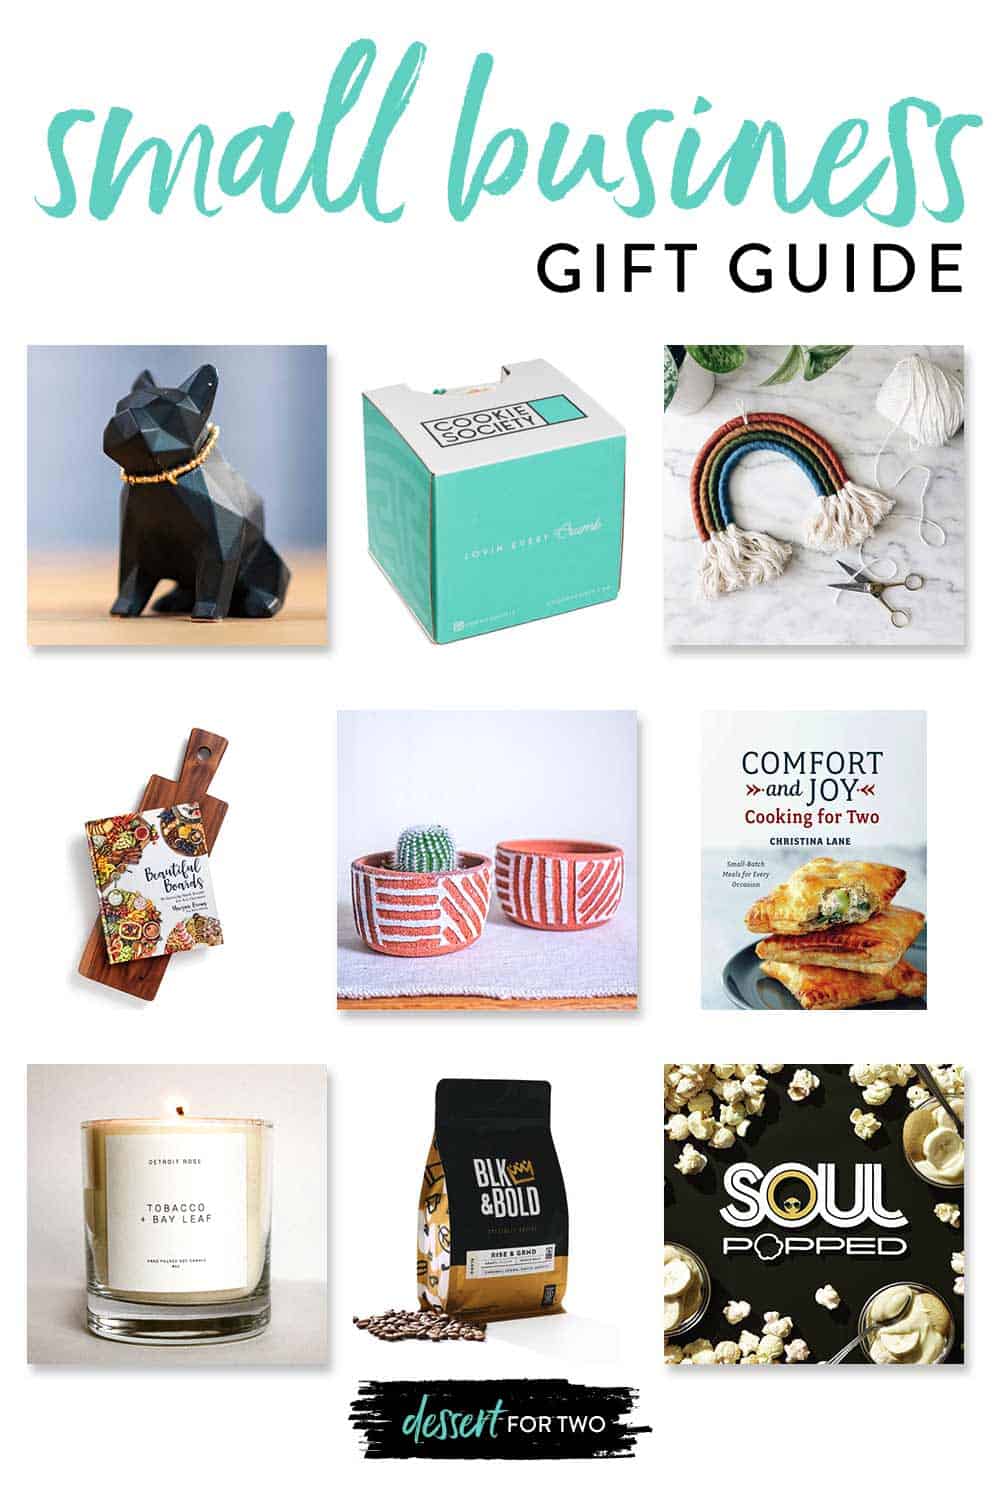 small business gift guide 2020